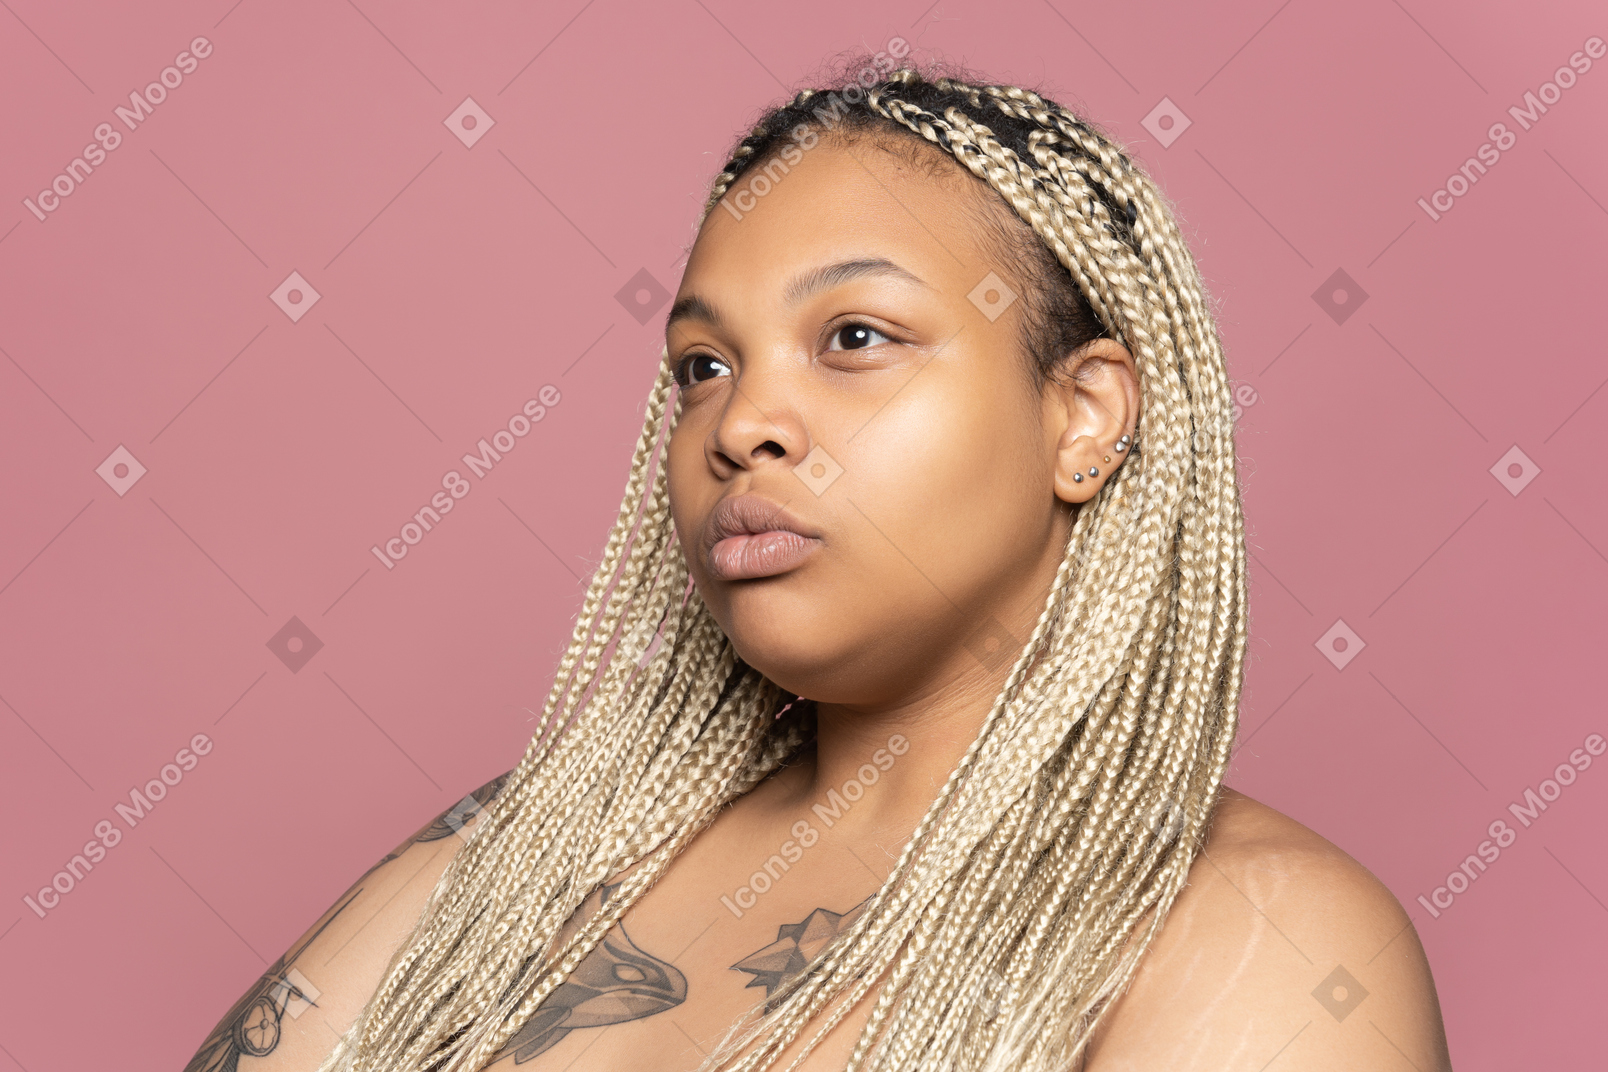 Portrait of a serious afro woman with long blond dreads